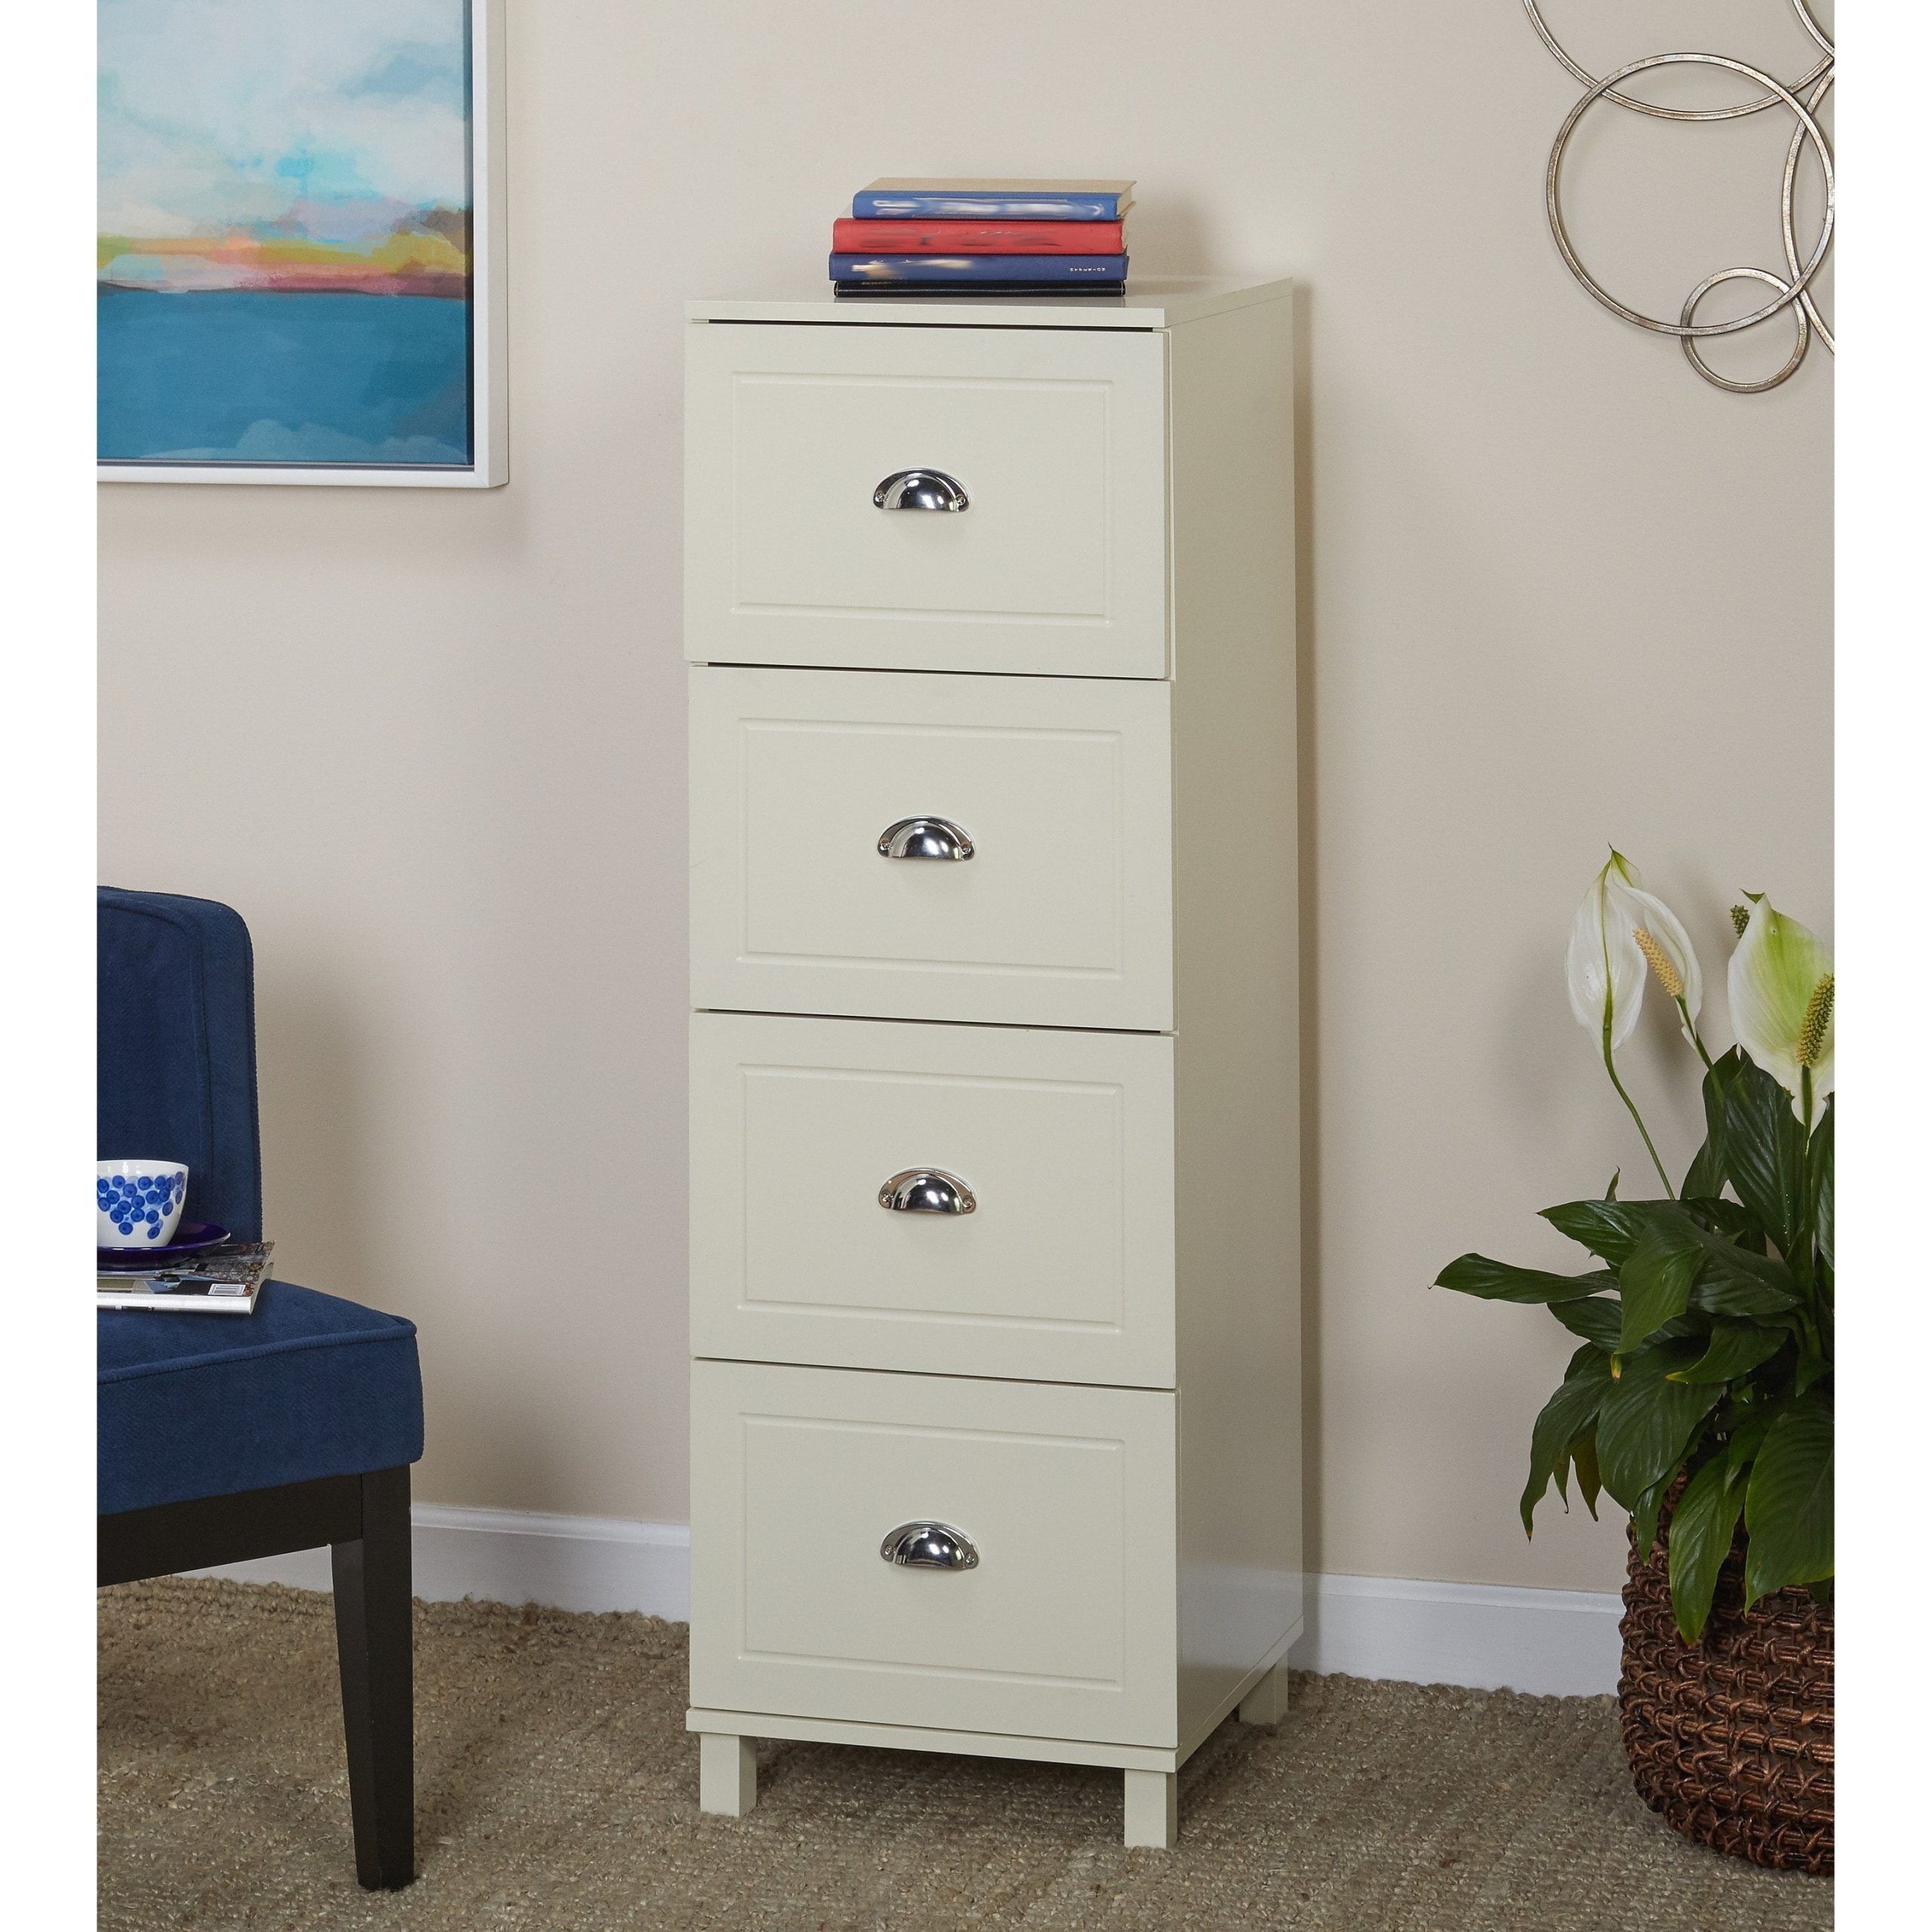 Bradley 4 Drawer Vertical Wood Filing Cabinet, White – Walmart Within Wood Cabinet With Drawers (Gallery 4 of 20)